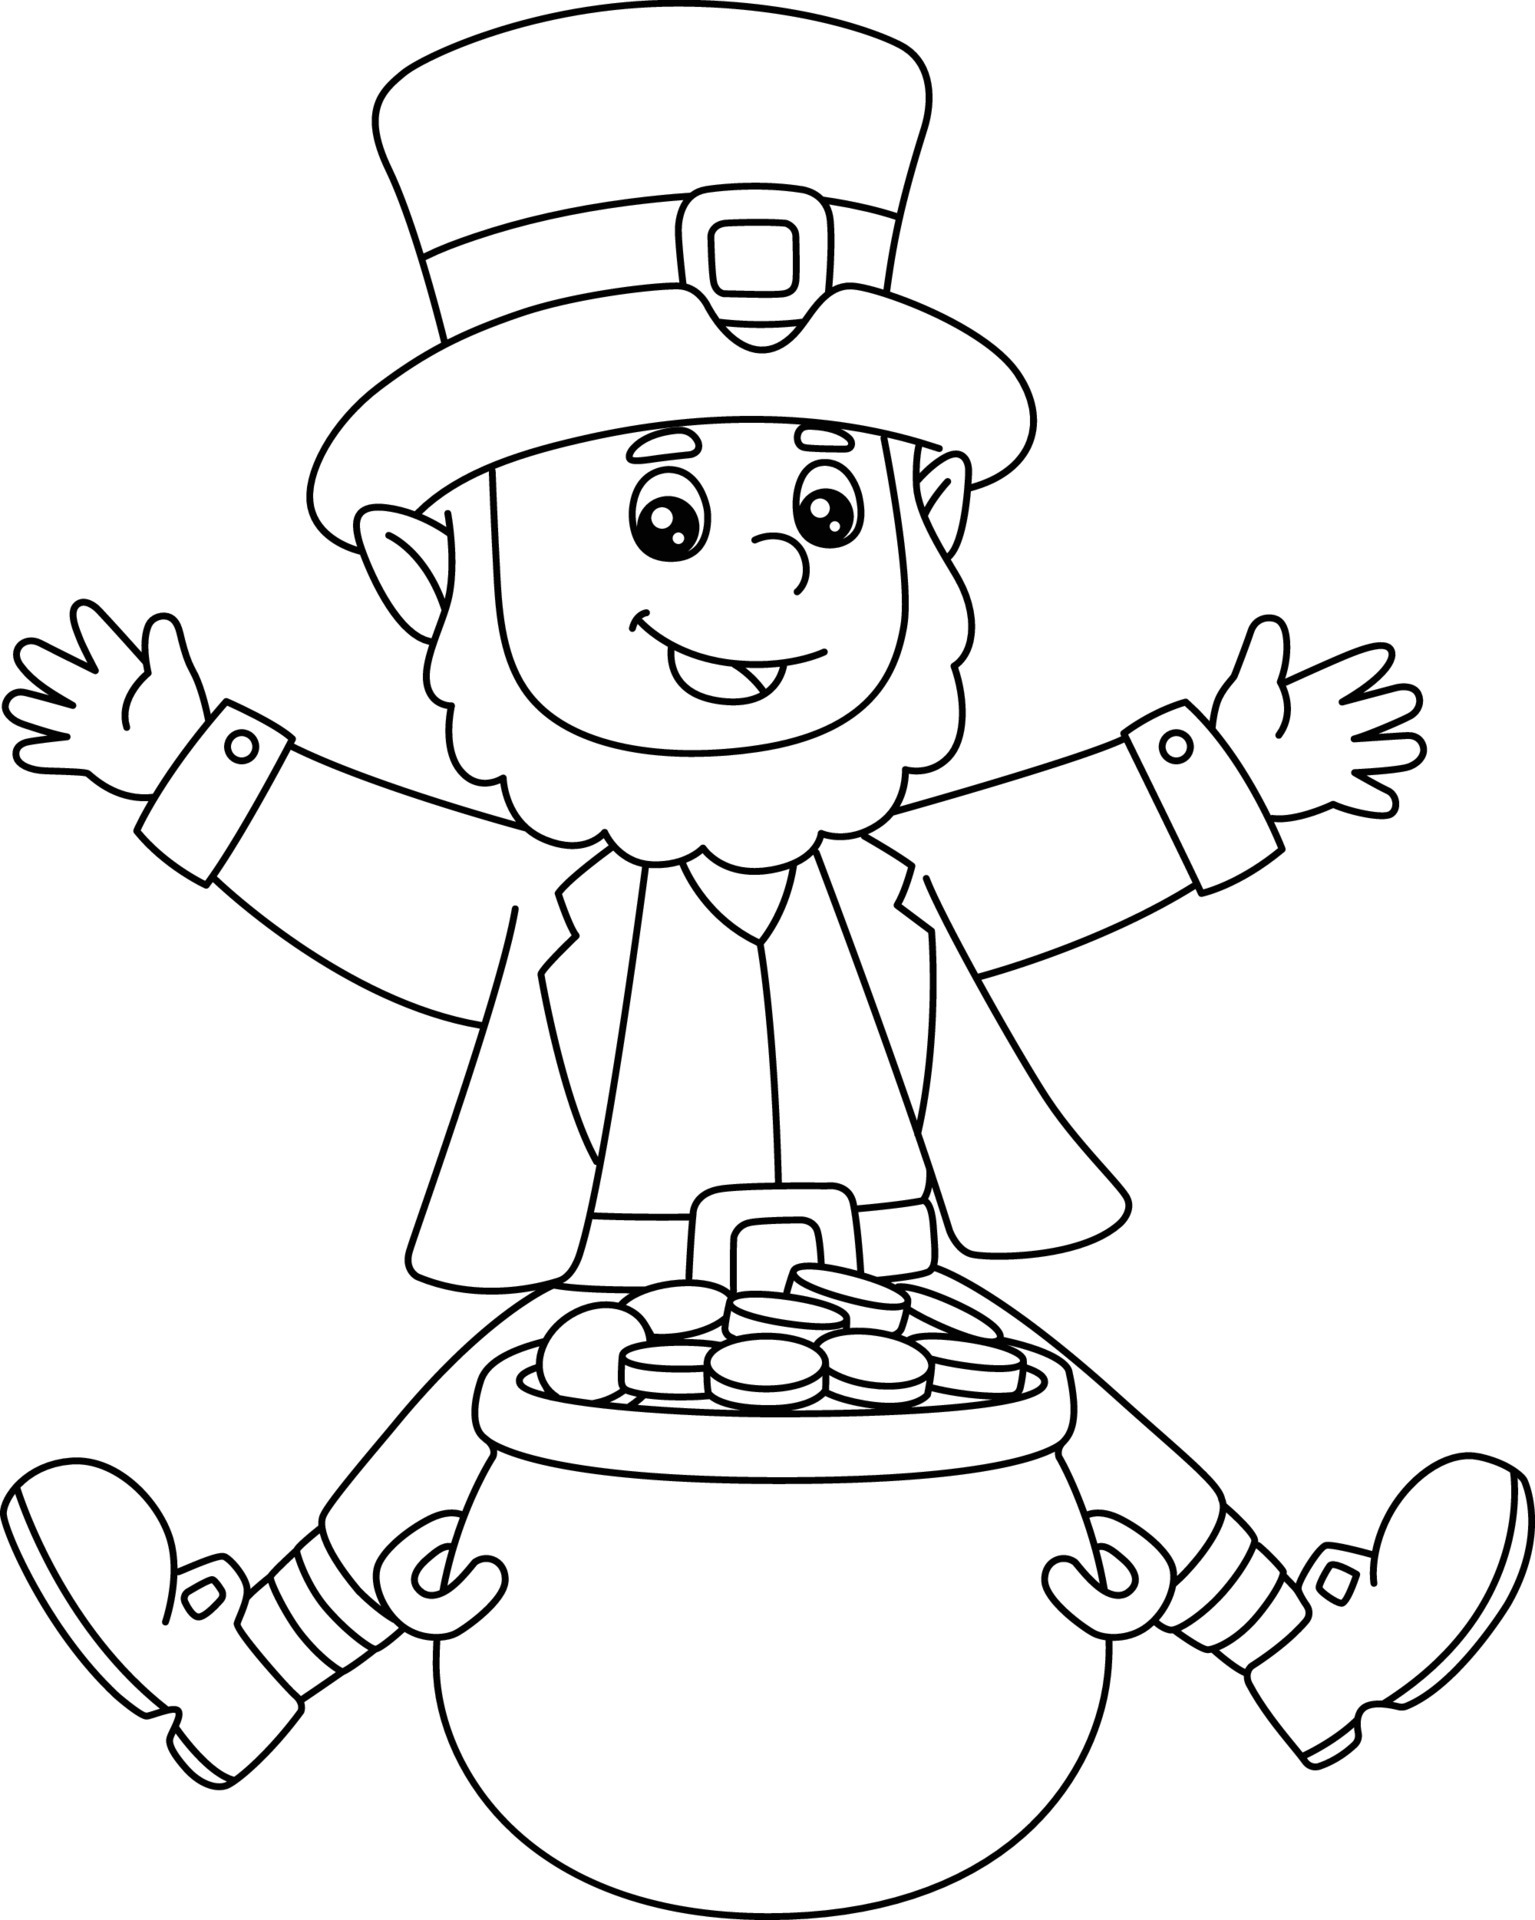 St. Patricks Day Leprechaun Coloring Page for Kids 20 Vector ...